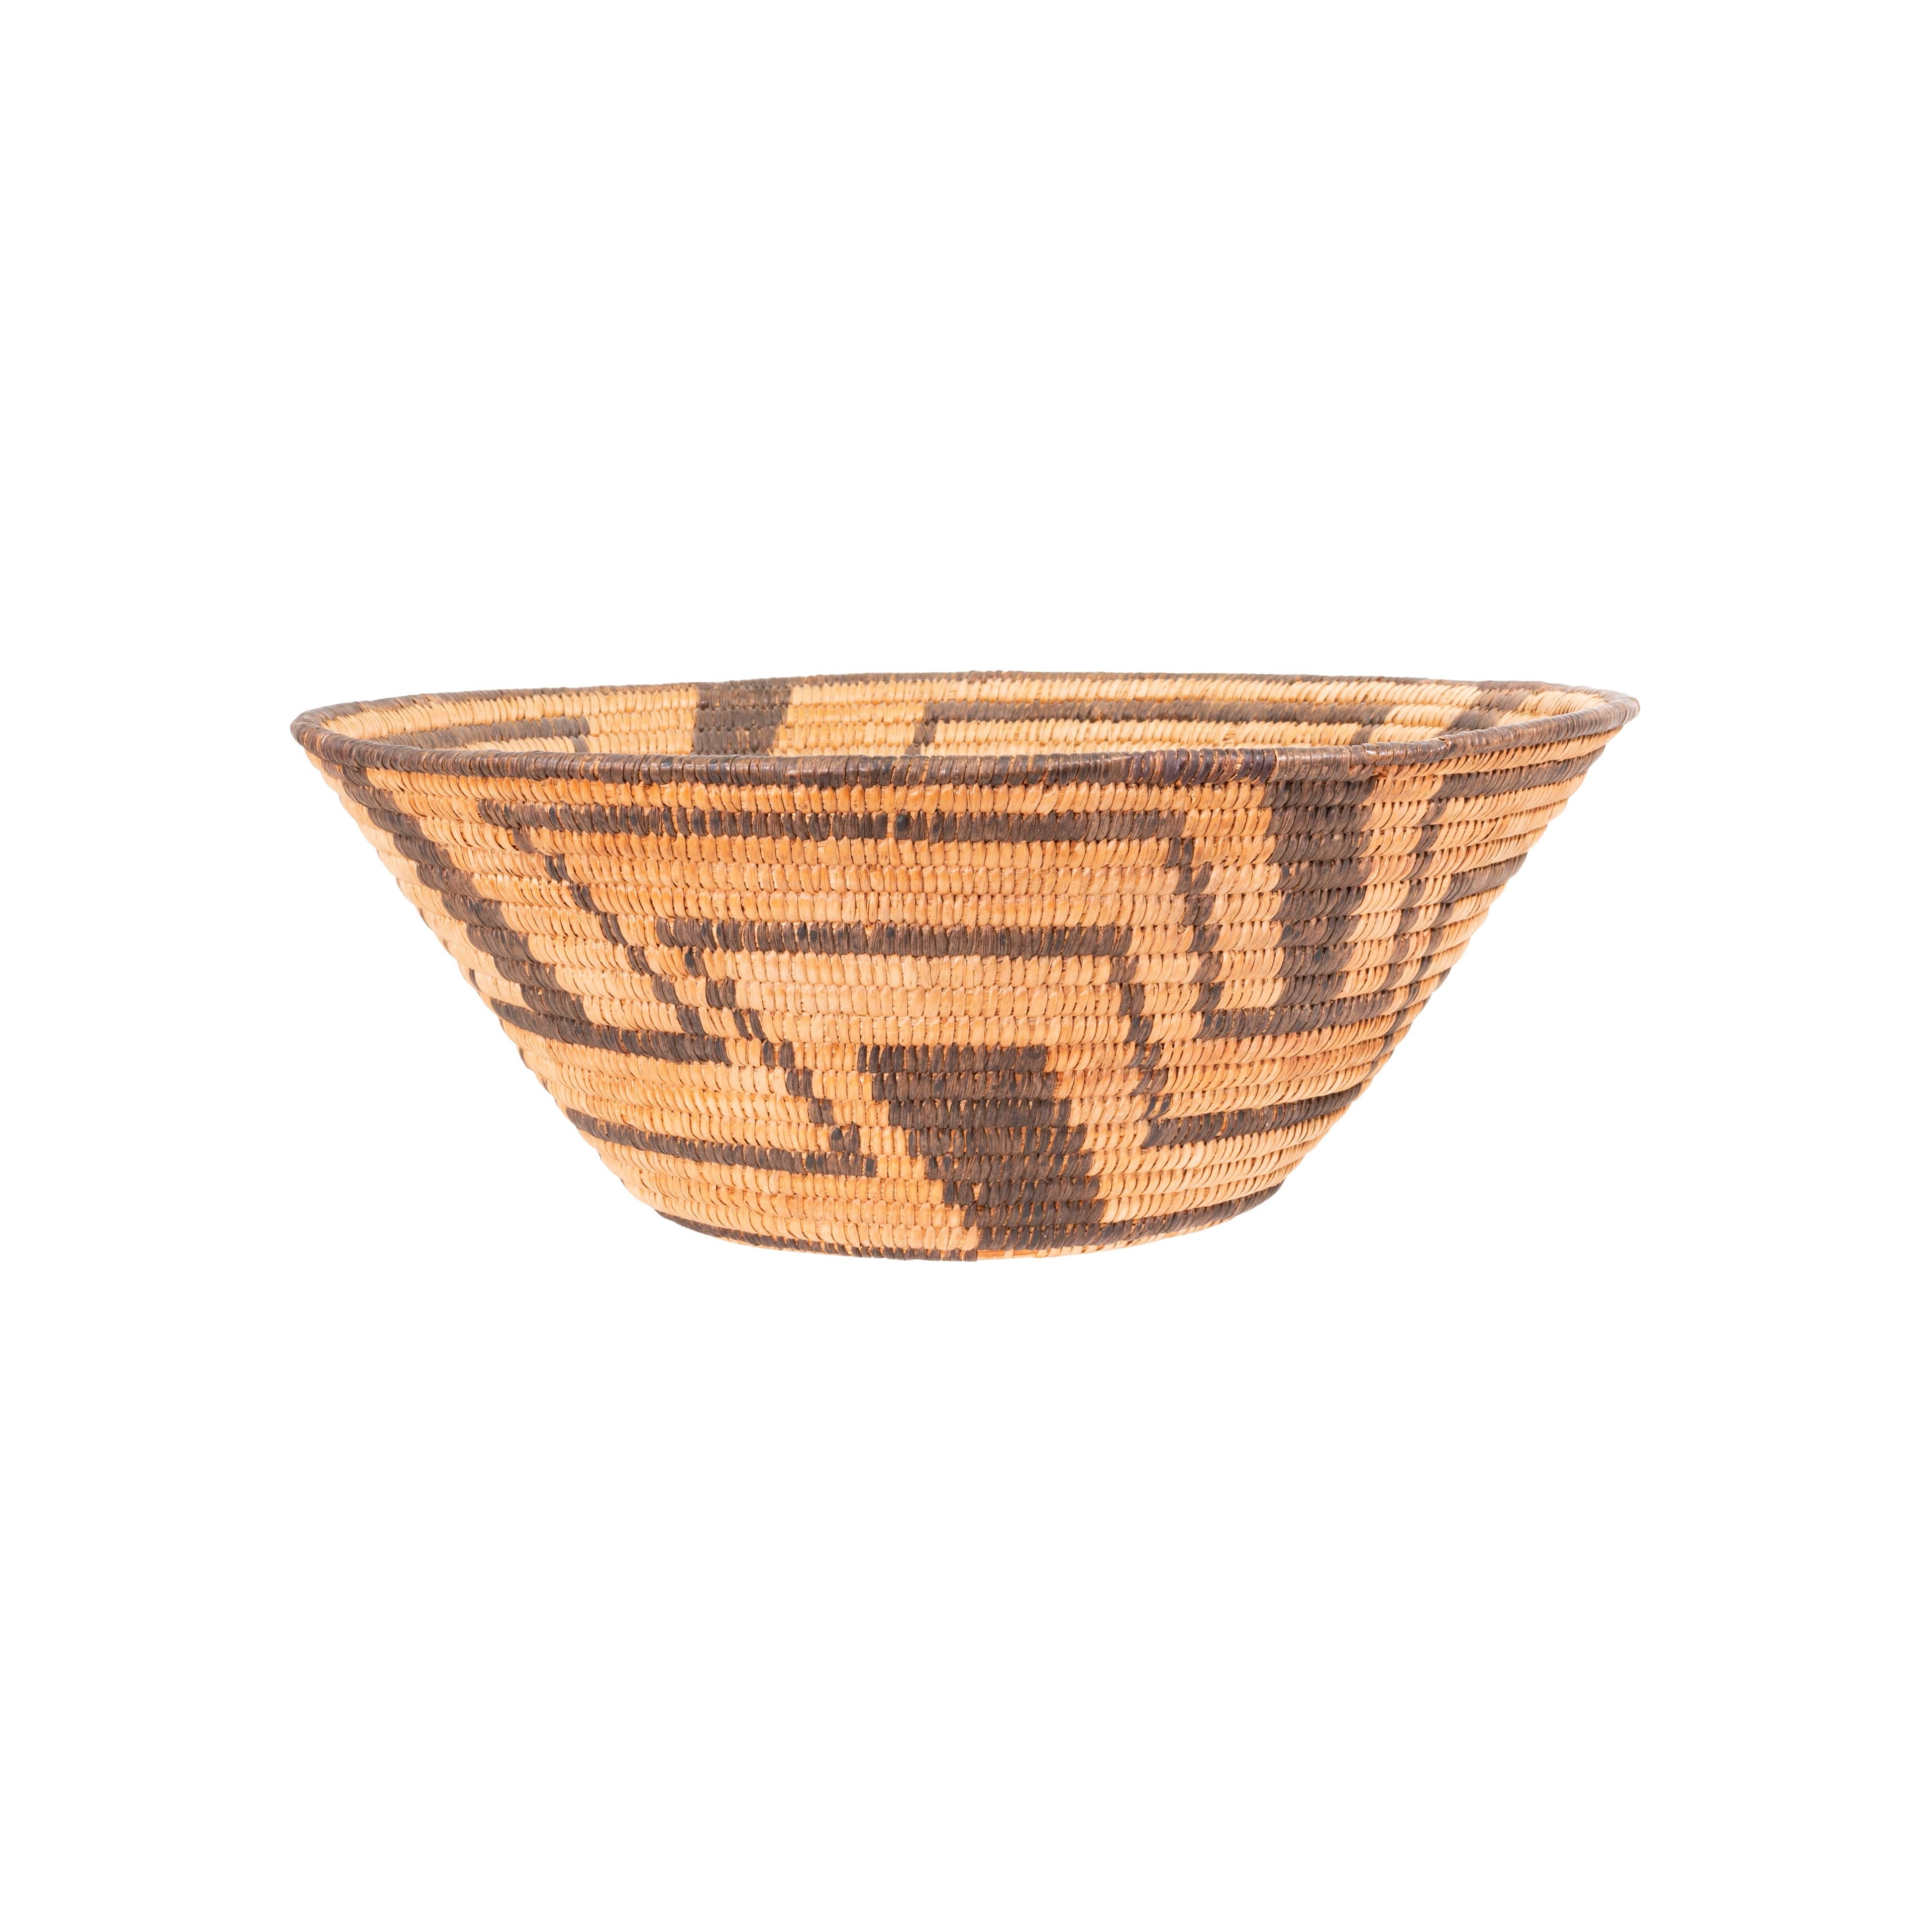 American Museum Documented Pima Basket For Sale